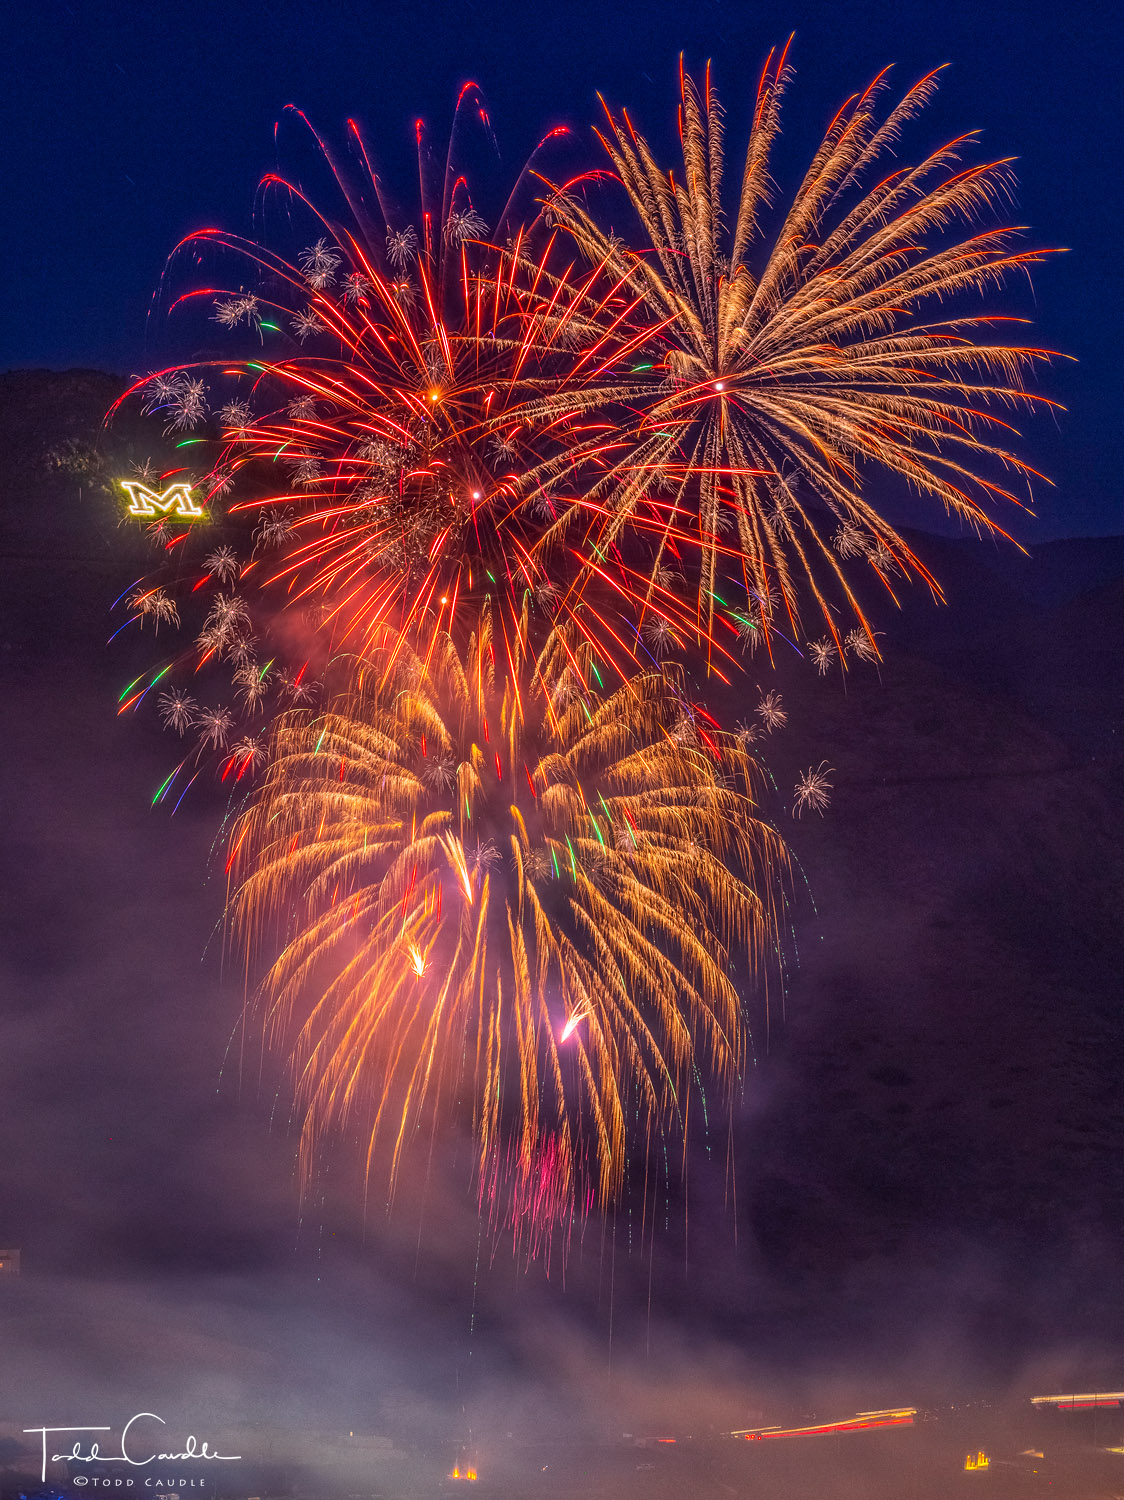 Fireworks burst in the air in front of Mount Zion and the Colorado School of Mines "M" logo.